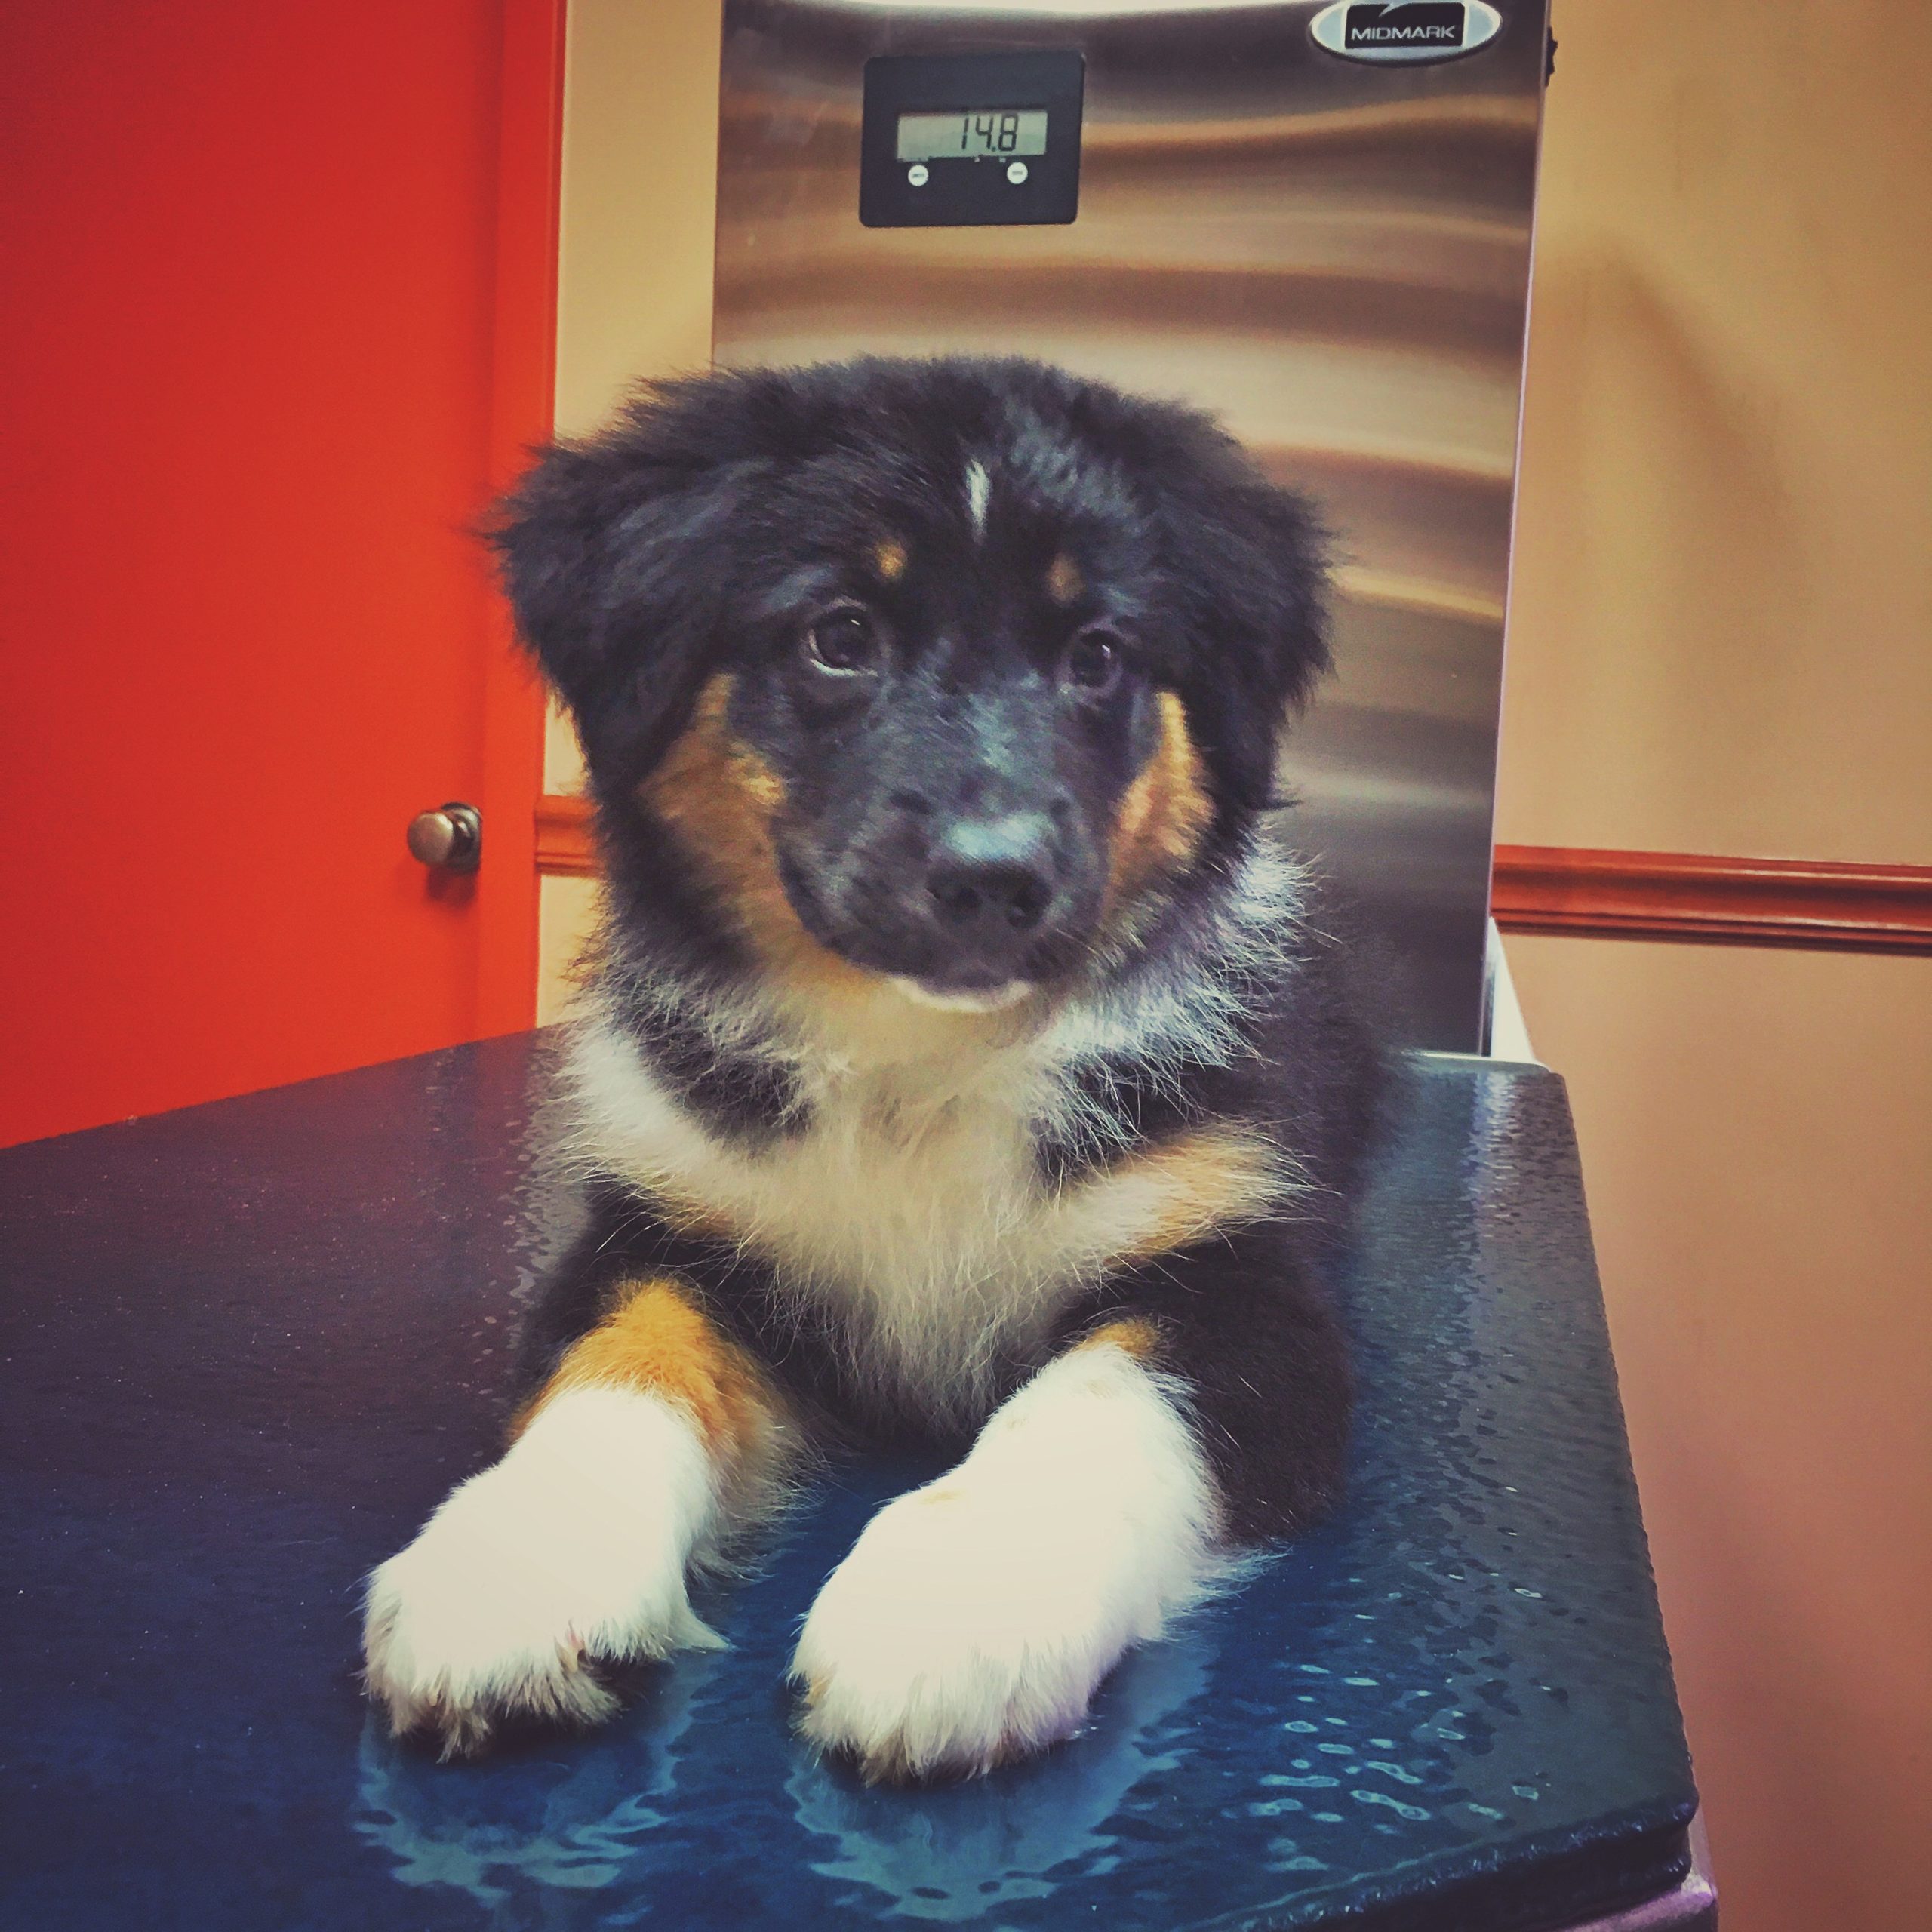 Australian shepherd lays down on scale at the vet to get weighed jessica shaw photography